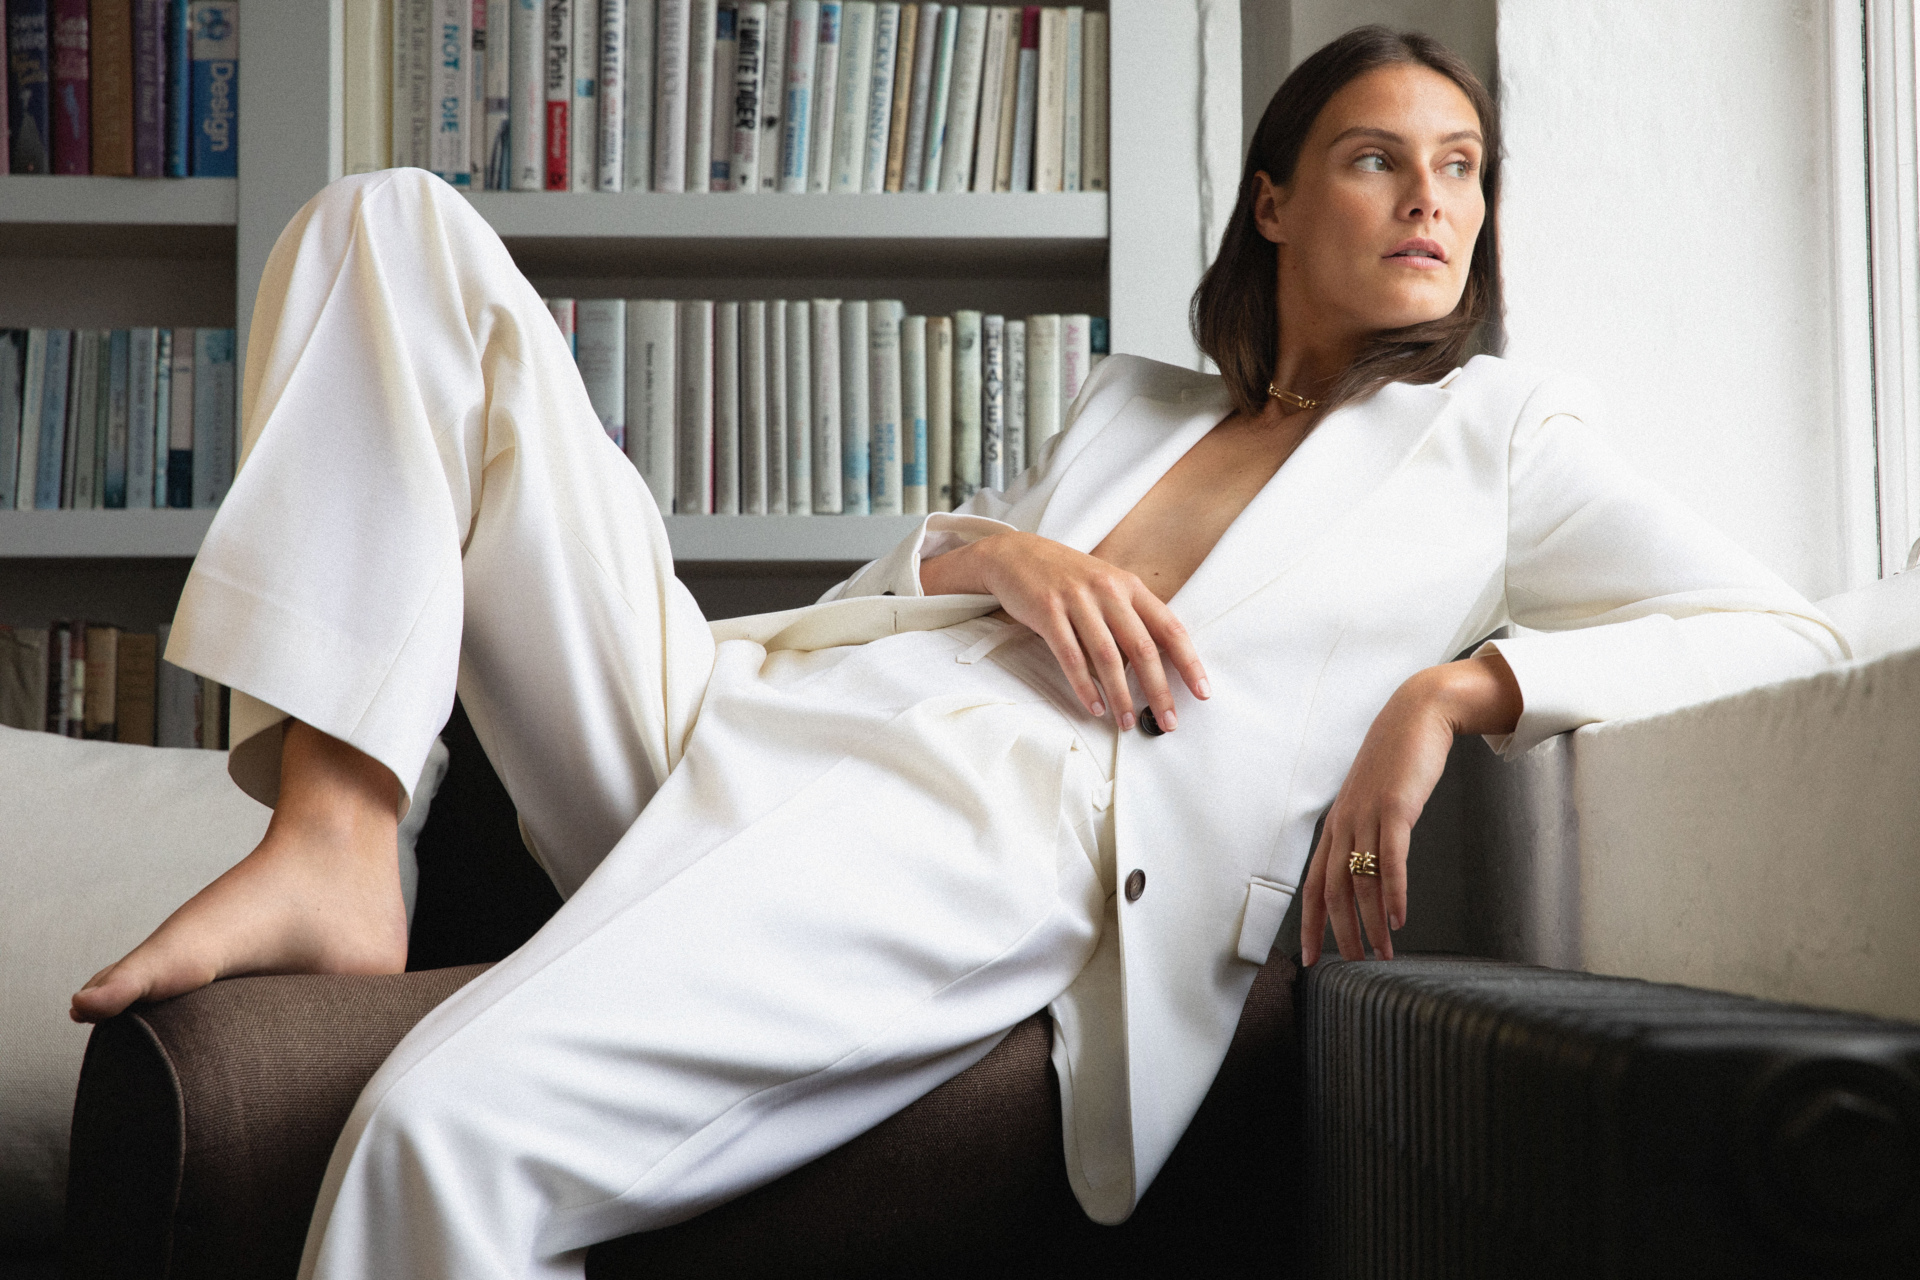 'The wardrobe for the modern woman': Daisy Knatchbull On The Deck's First Ready-To-Wear Collection